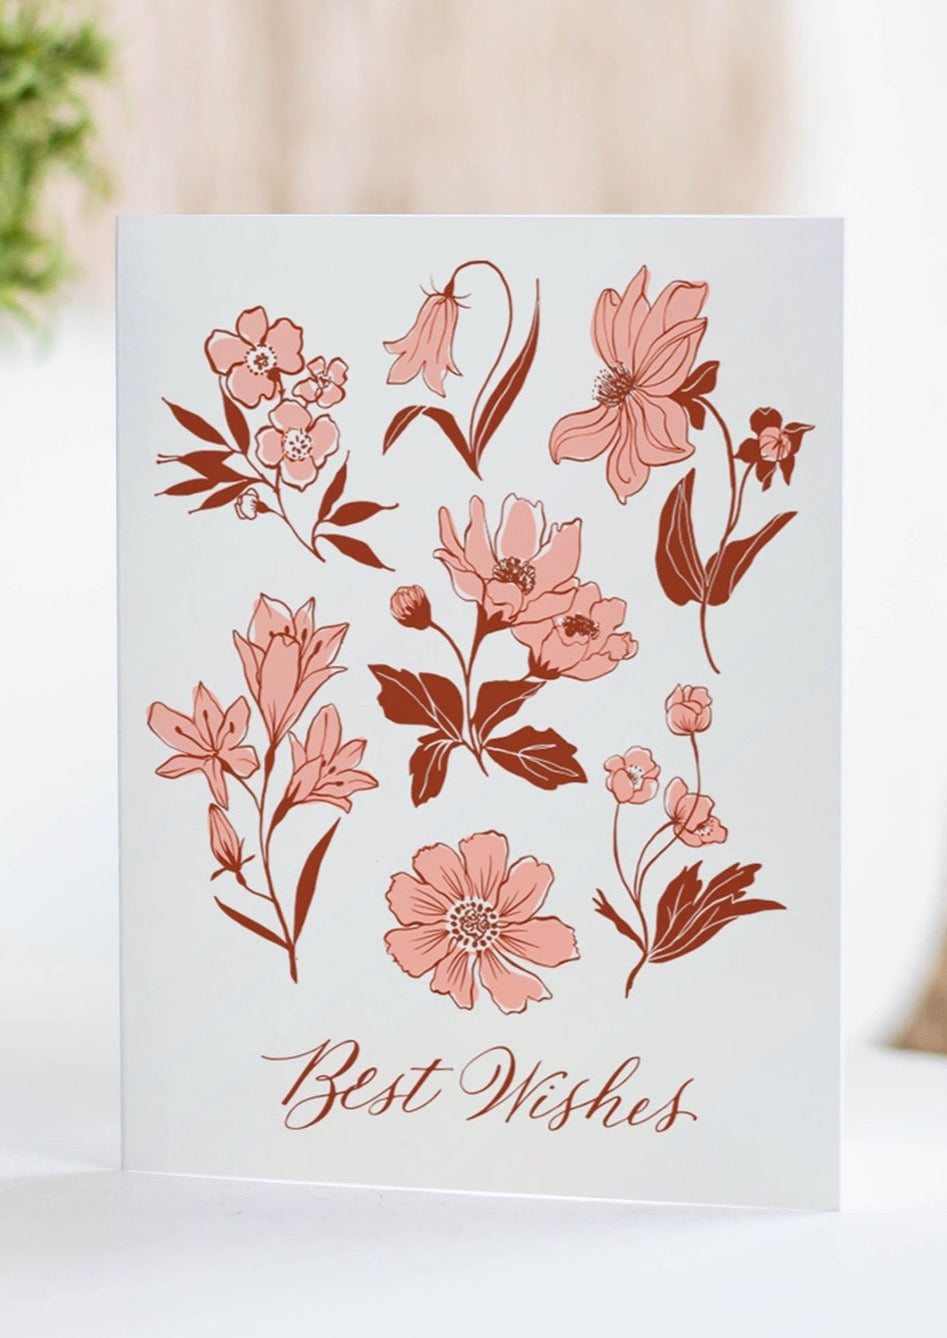 Scottish Floral Best Wishes Card